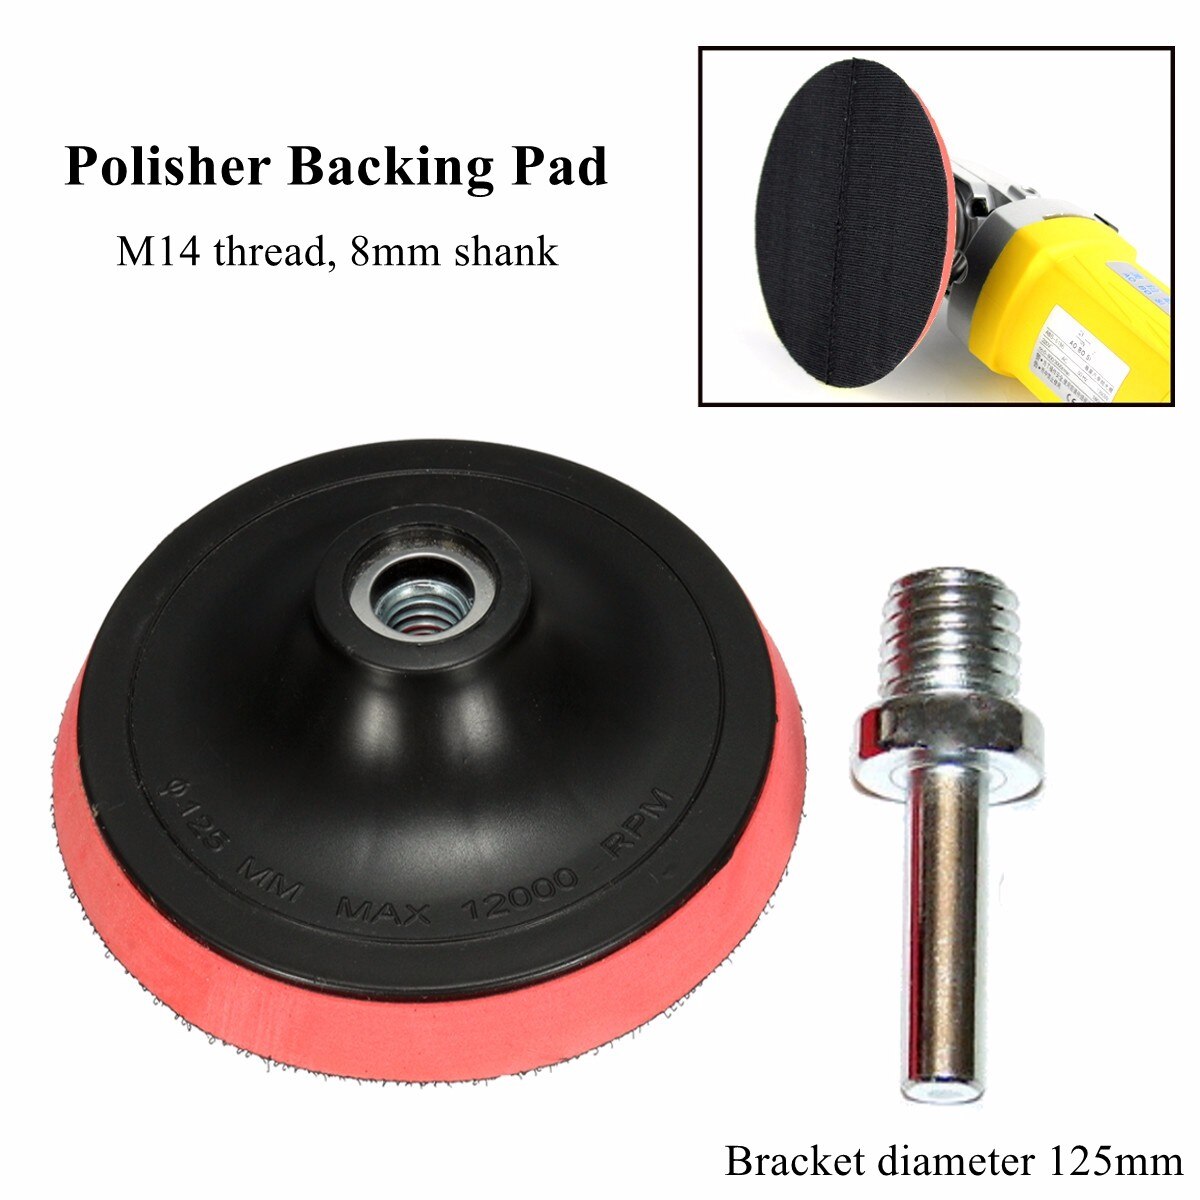 35 % ο 5 & &  е   ÷Ʈ  Ŀ + M14 帱  ŰƮ/35% NEW 5&& Backing Pad Polishing Buffing Plate Rubber Backer + M14 Drill Thread Kit